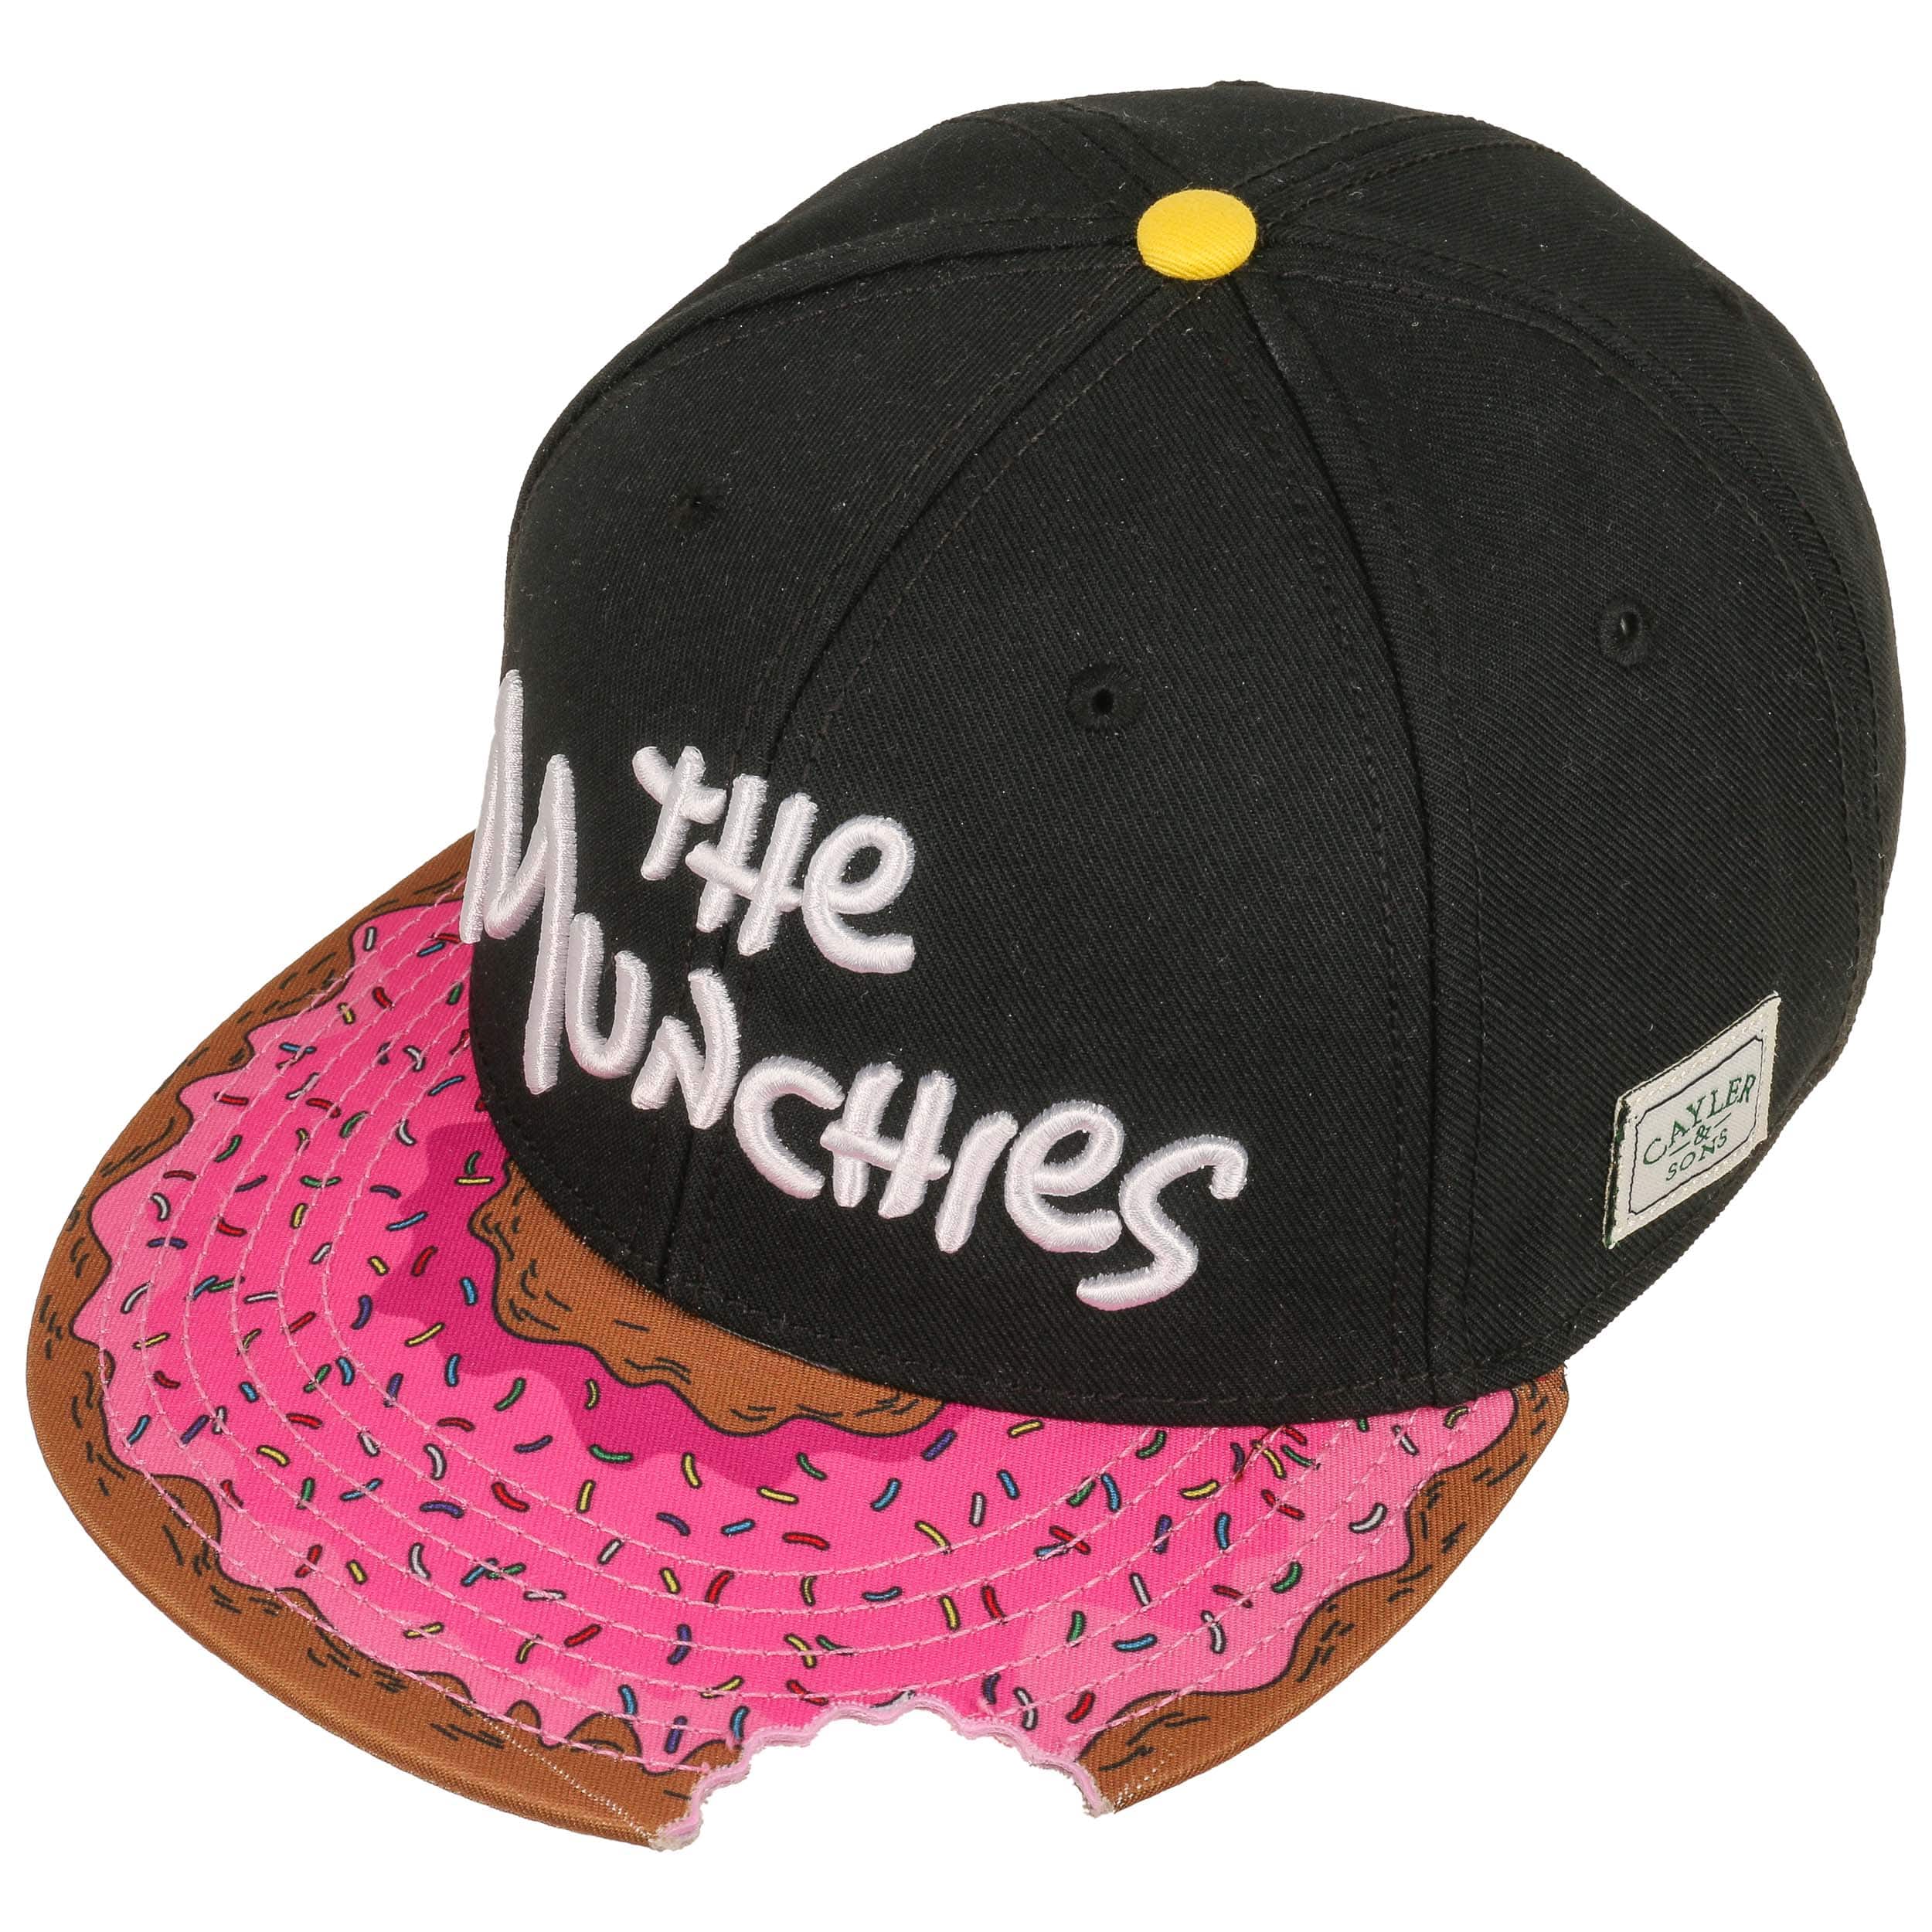 Munchies Classic Cap by Cayler & Sons - 32,95